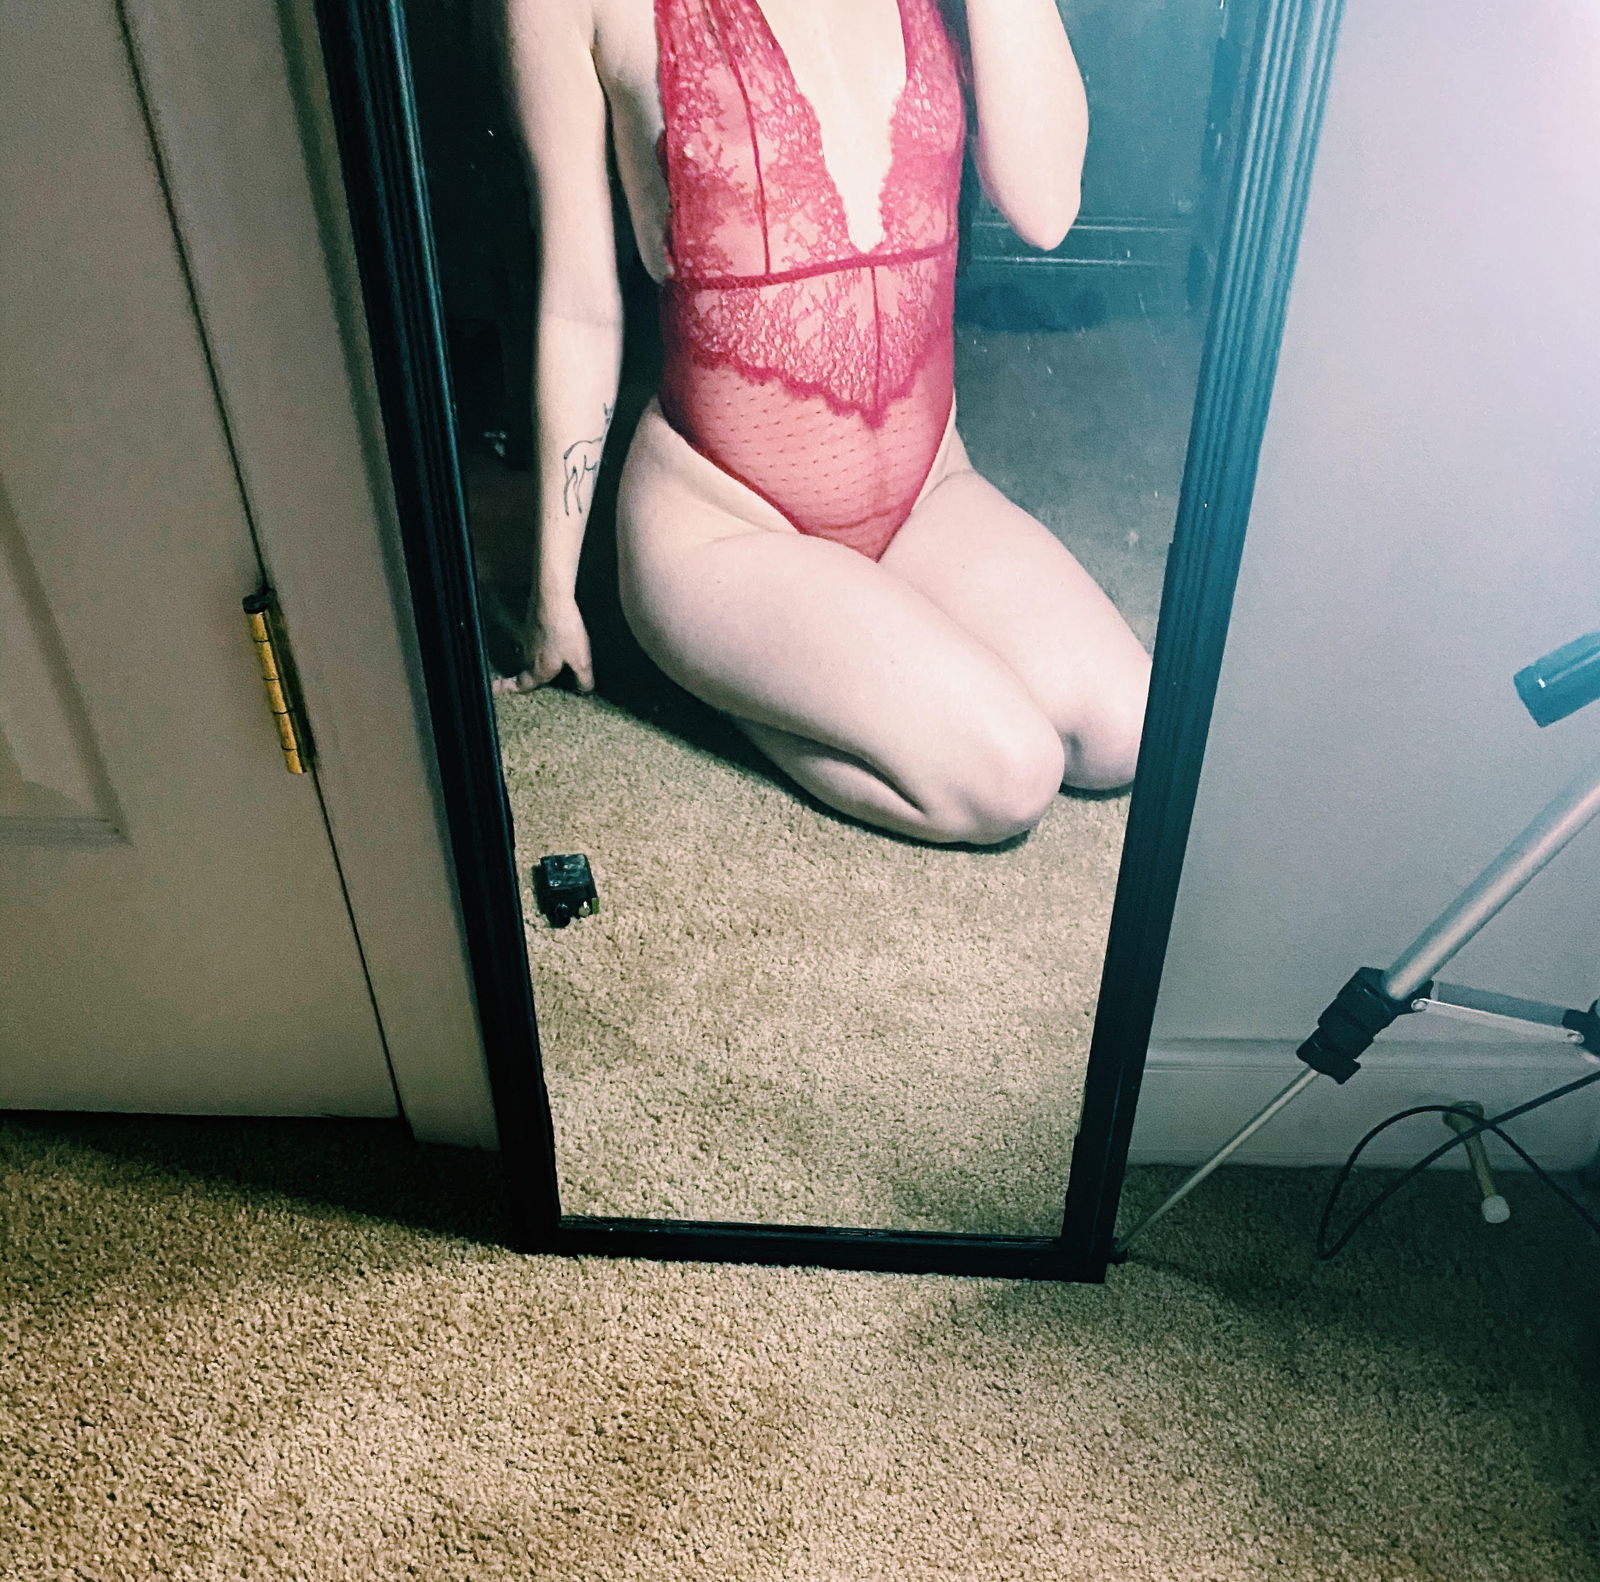 Watch the Photo by zoeyReid20 with the username @zoeyReid20, posted on December 23, 2019. The post is about the topic Sexsells. and the text says '<3 add me on (kik) zoeyreid20
or add me on (snapchat) zoey_reid6553
I do any kind of custom photos! 
I sell socks,panties,bas,thongs and shoes.
everything your into im into ;)

i accept payment from venmo and cashapp!'